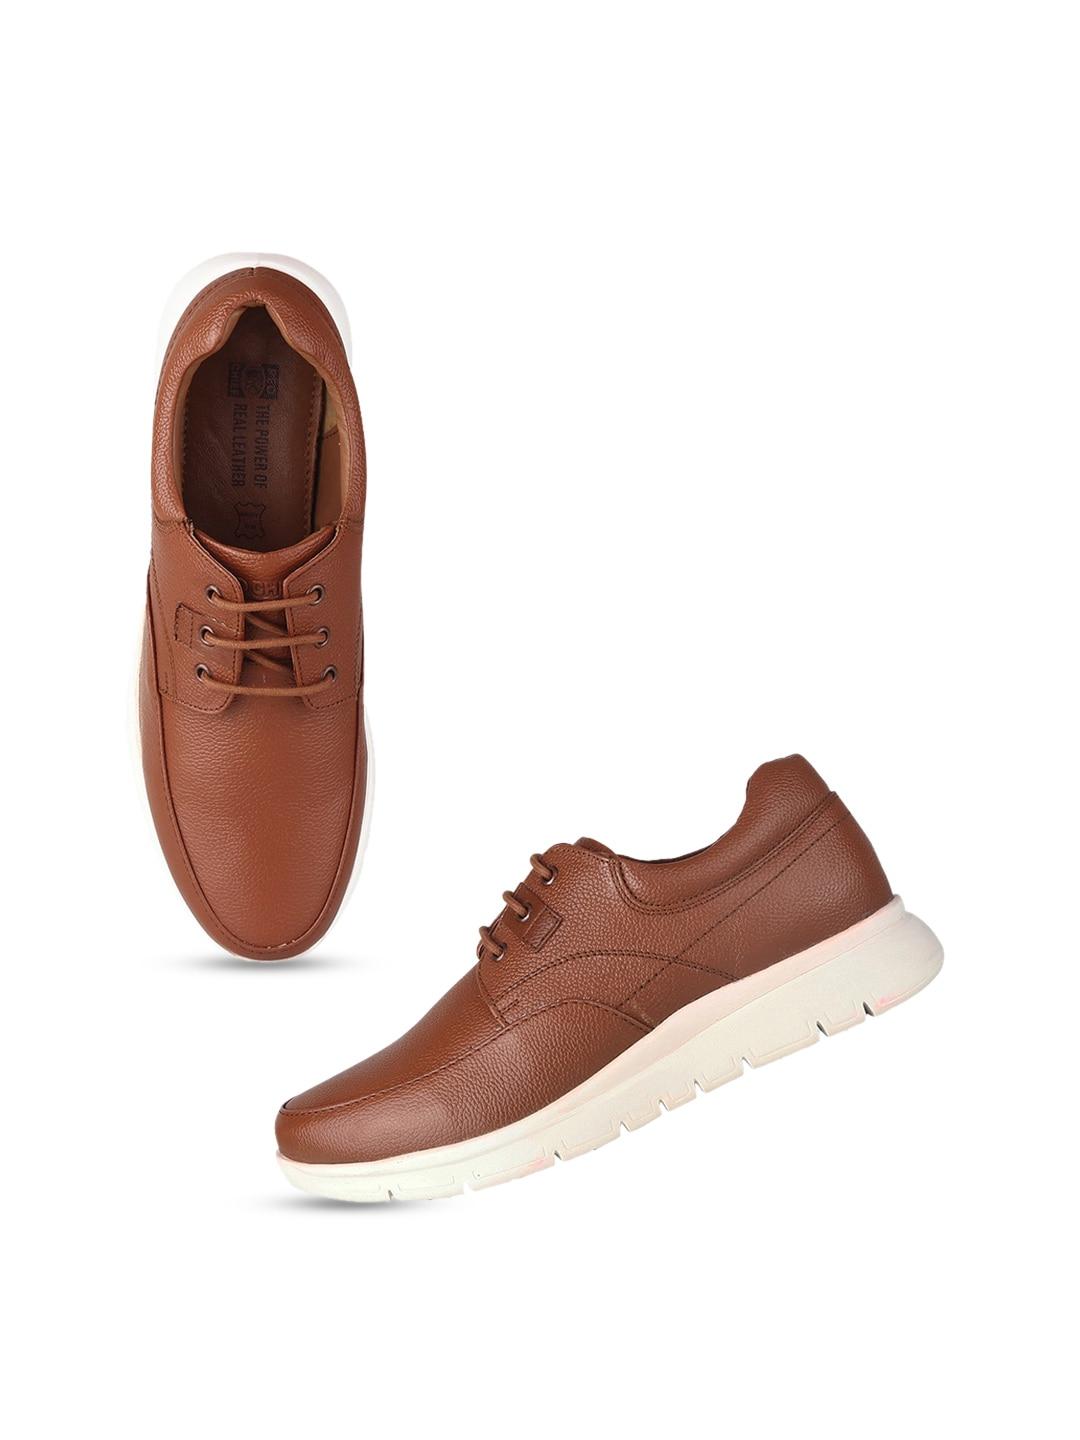 red-chief-men-textured-leather-padded-insole-contrast-sole-derbys